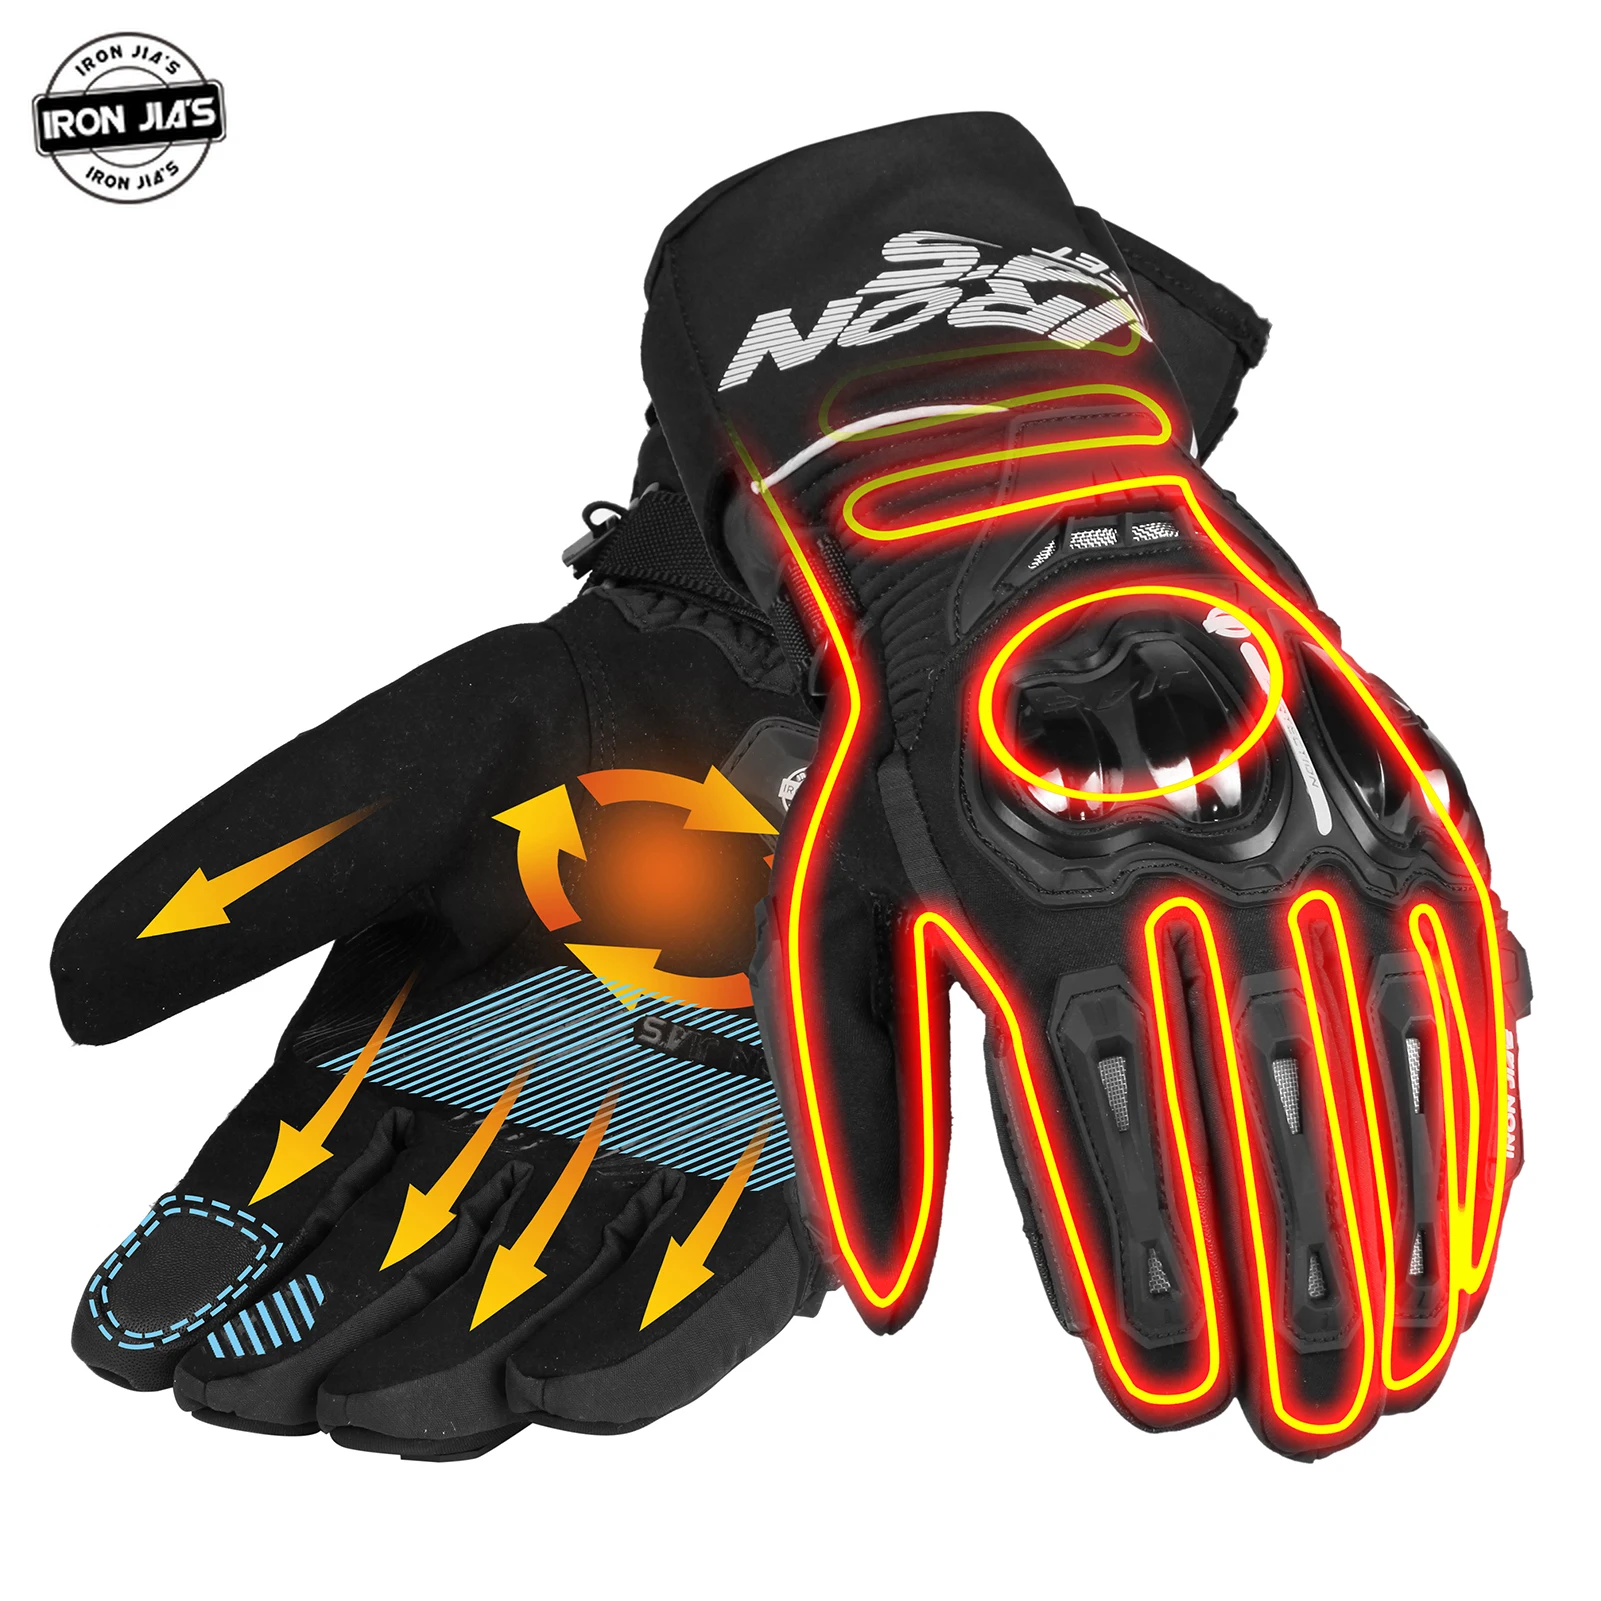 IRON JIA'S Heated Motorcycle Gloves Touch Screen Winter Moto Heated 12V Vehicle Battery Powered Gloves Snowboarding Motorbike